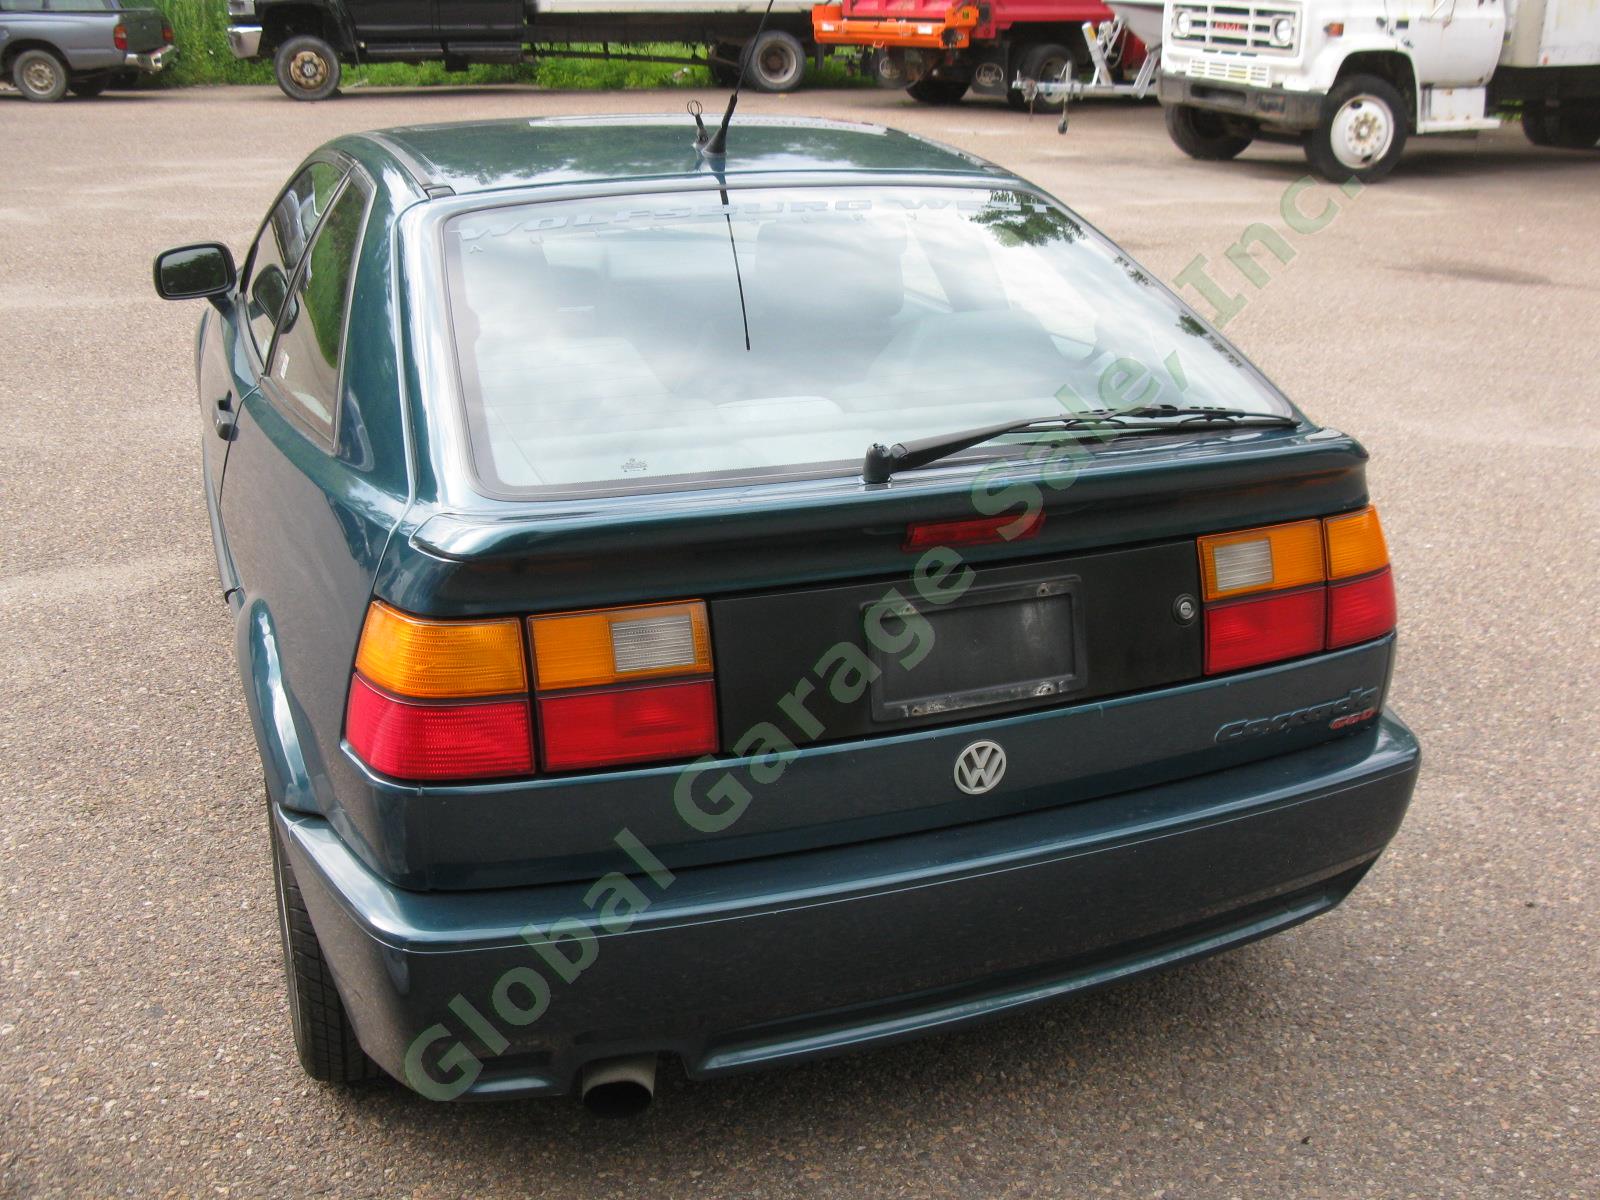 1992 VW Volkswagen Corrado G60 Supercharged 158hp 1.8L 5-Spd One Owner LOW PRICE 3